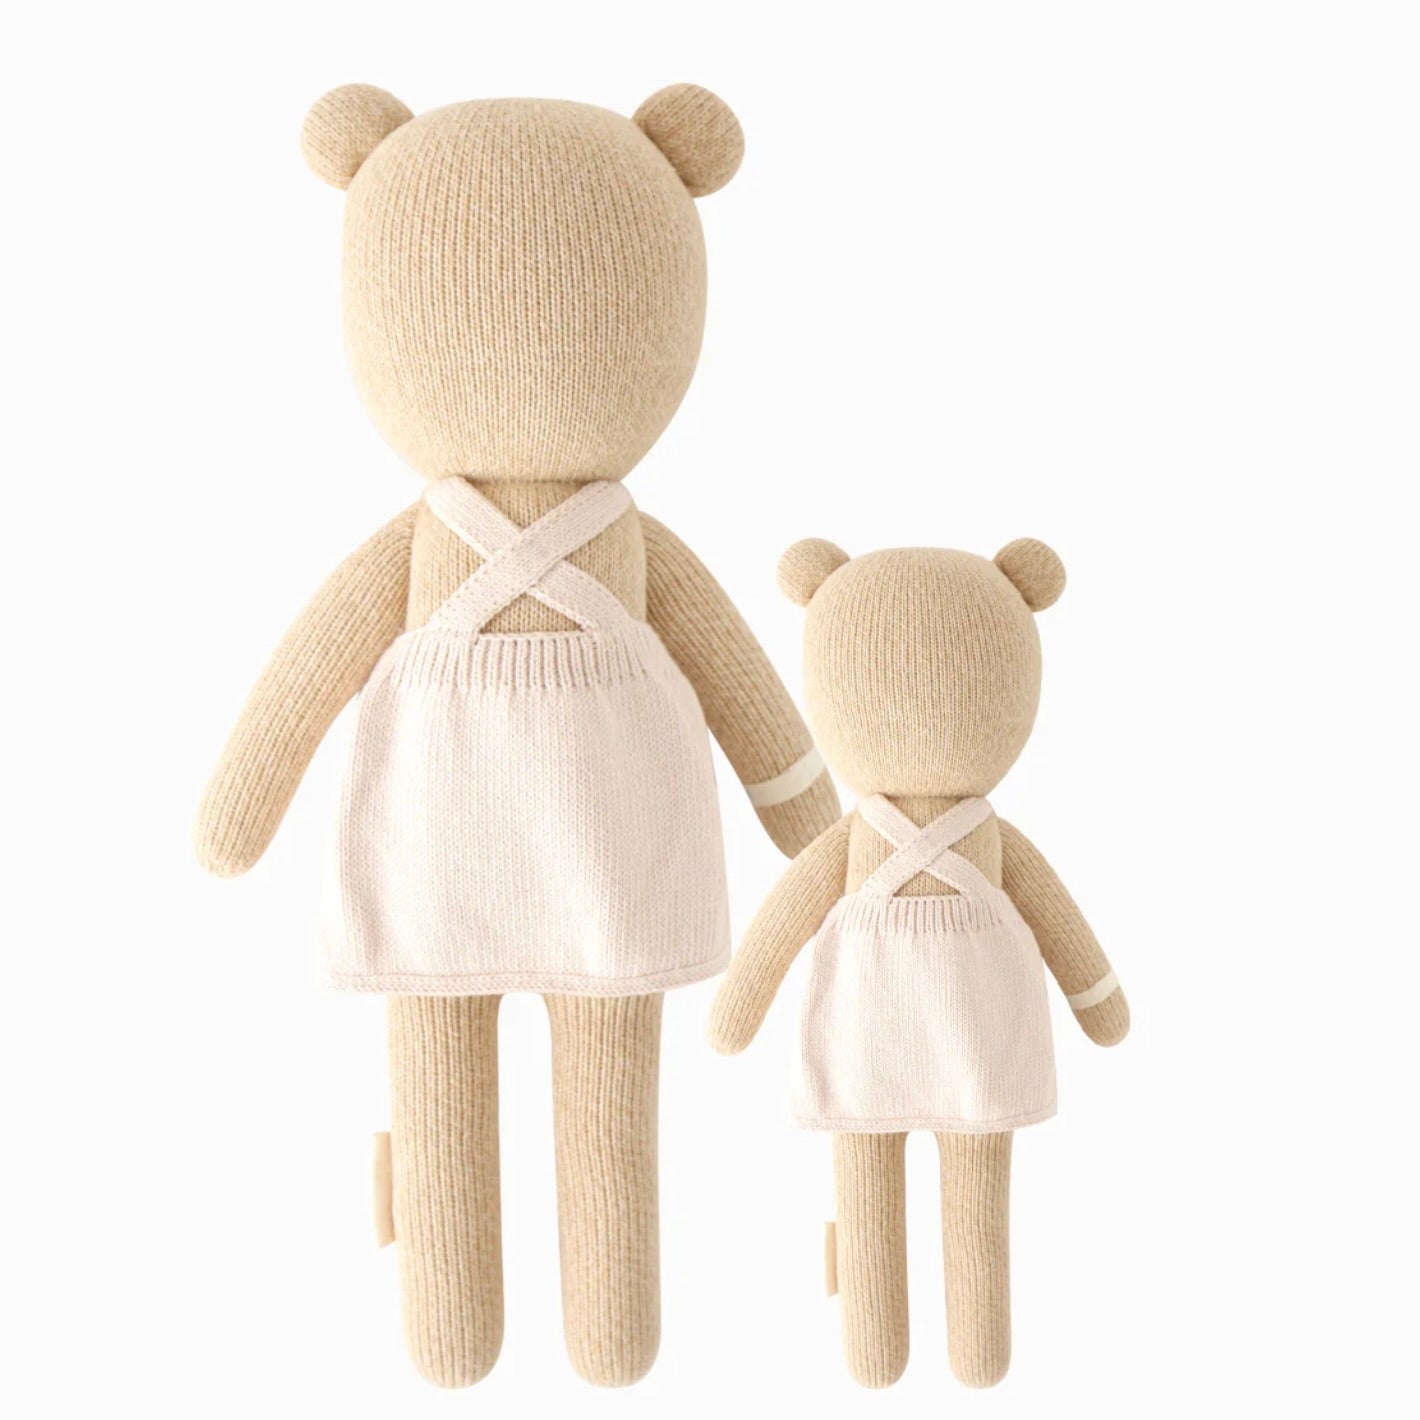 Goldie the Honey Bear by Cuddle + Kind  - 2 sizes